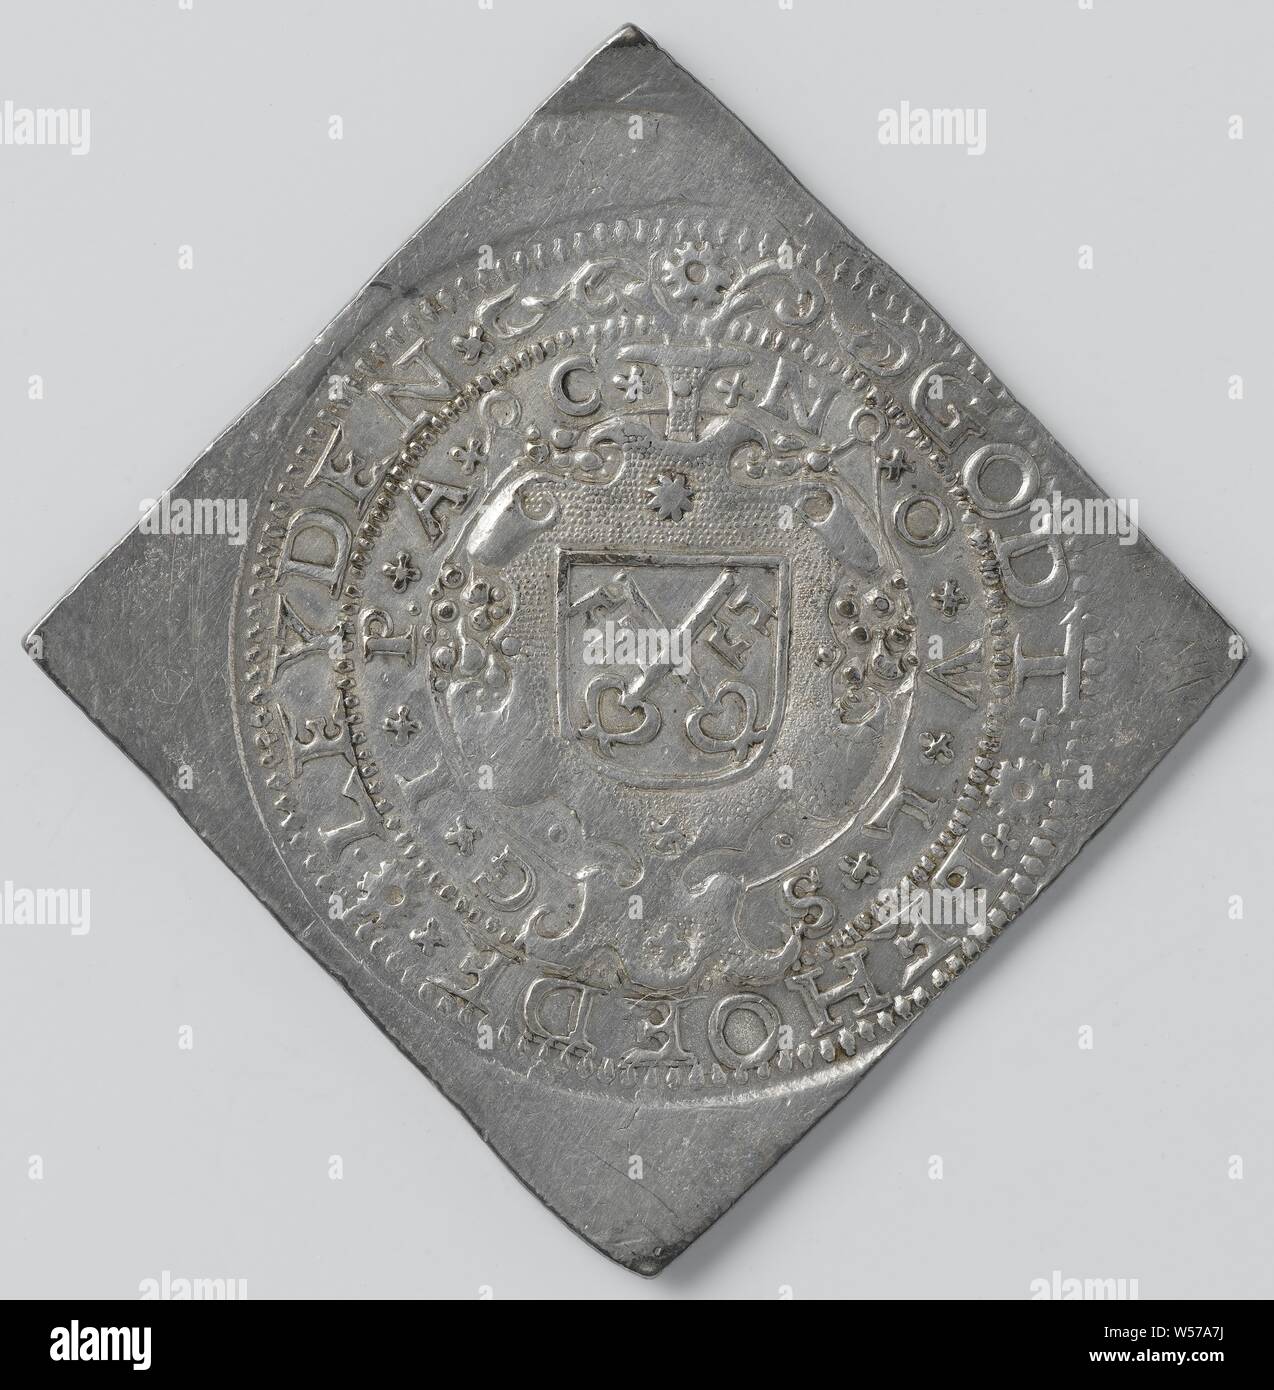 Twenty-eight pennies, siege of Leiden, emergency coin made of silver from churches and monasteries, diamond shaped emergency coin. Front: coat of arms in cartouche inside two-line circumference. Reverse: lion with freedom hat on spear in both claws between year within a circumscription, Leiden, anonymous, Dordrecht, 10-Jul-1574, silver (metal), striking (metalworking), h 5.1 cm × h 5 cm × w 19.44 Stock Photo